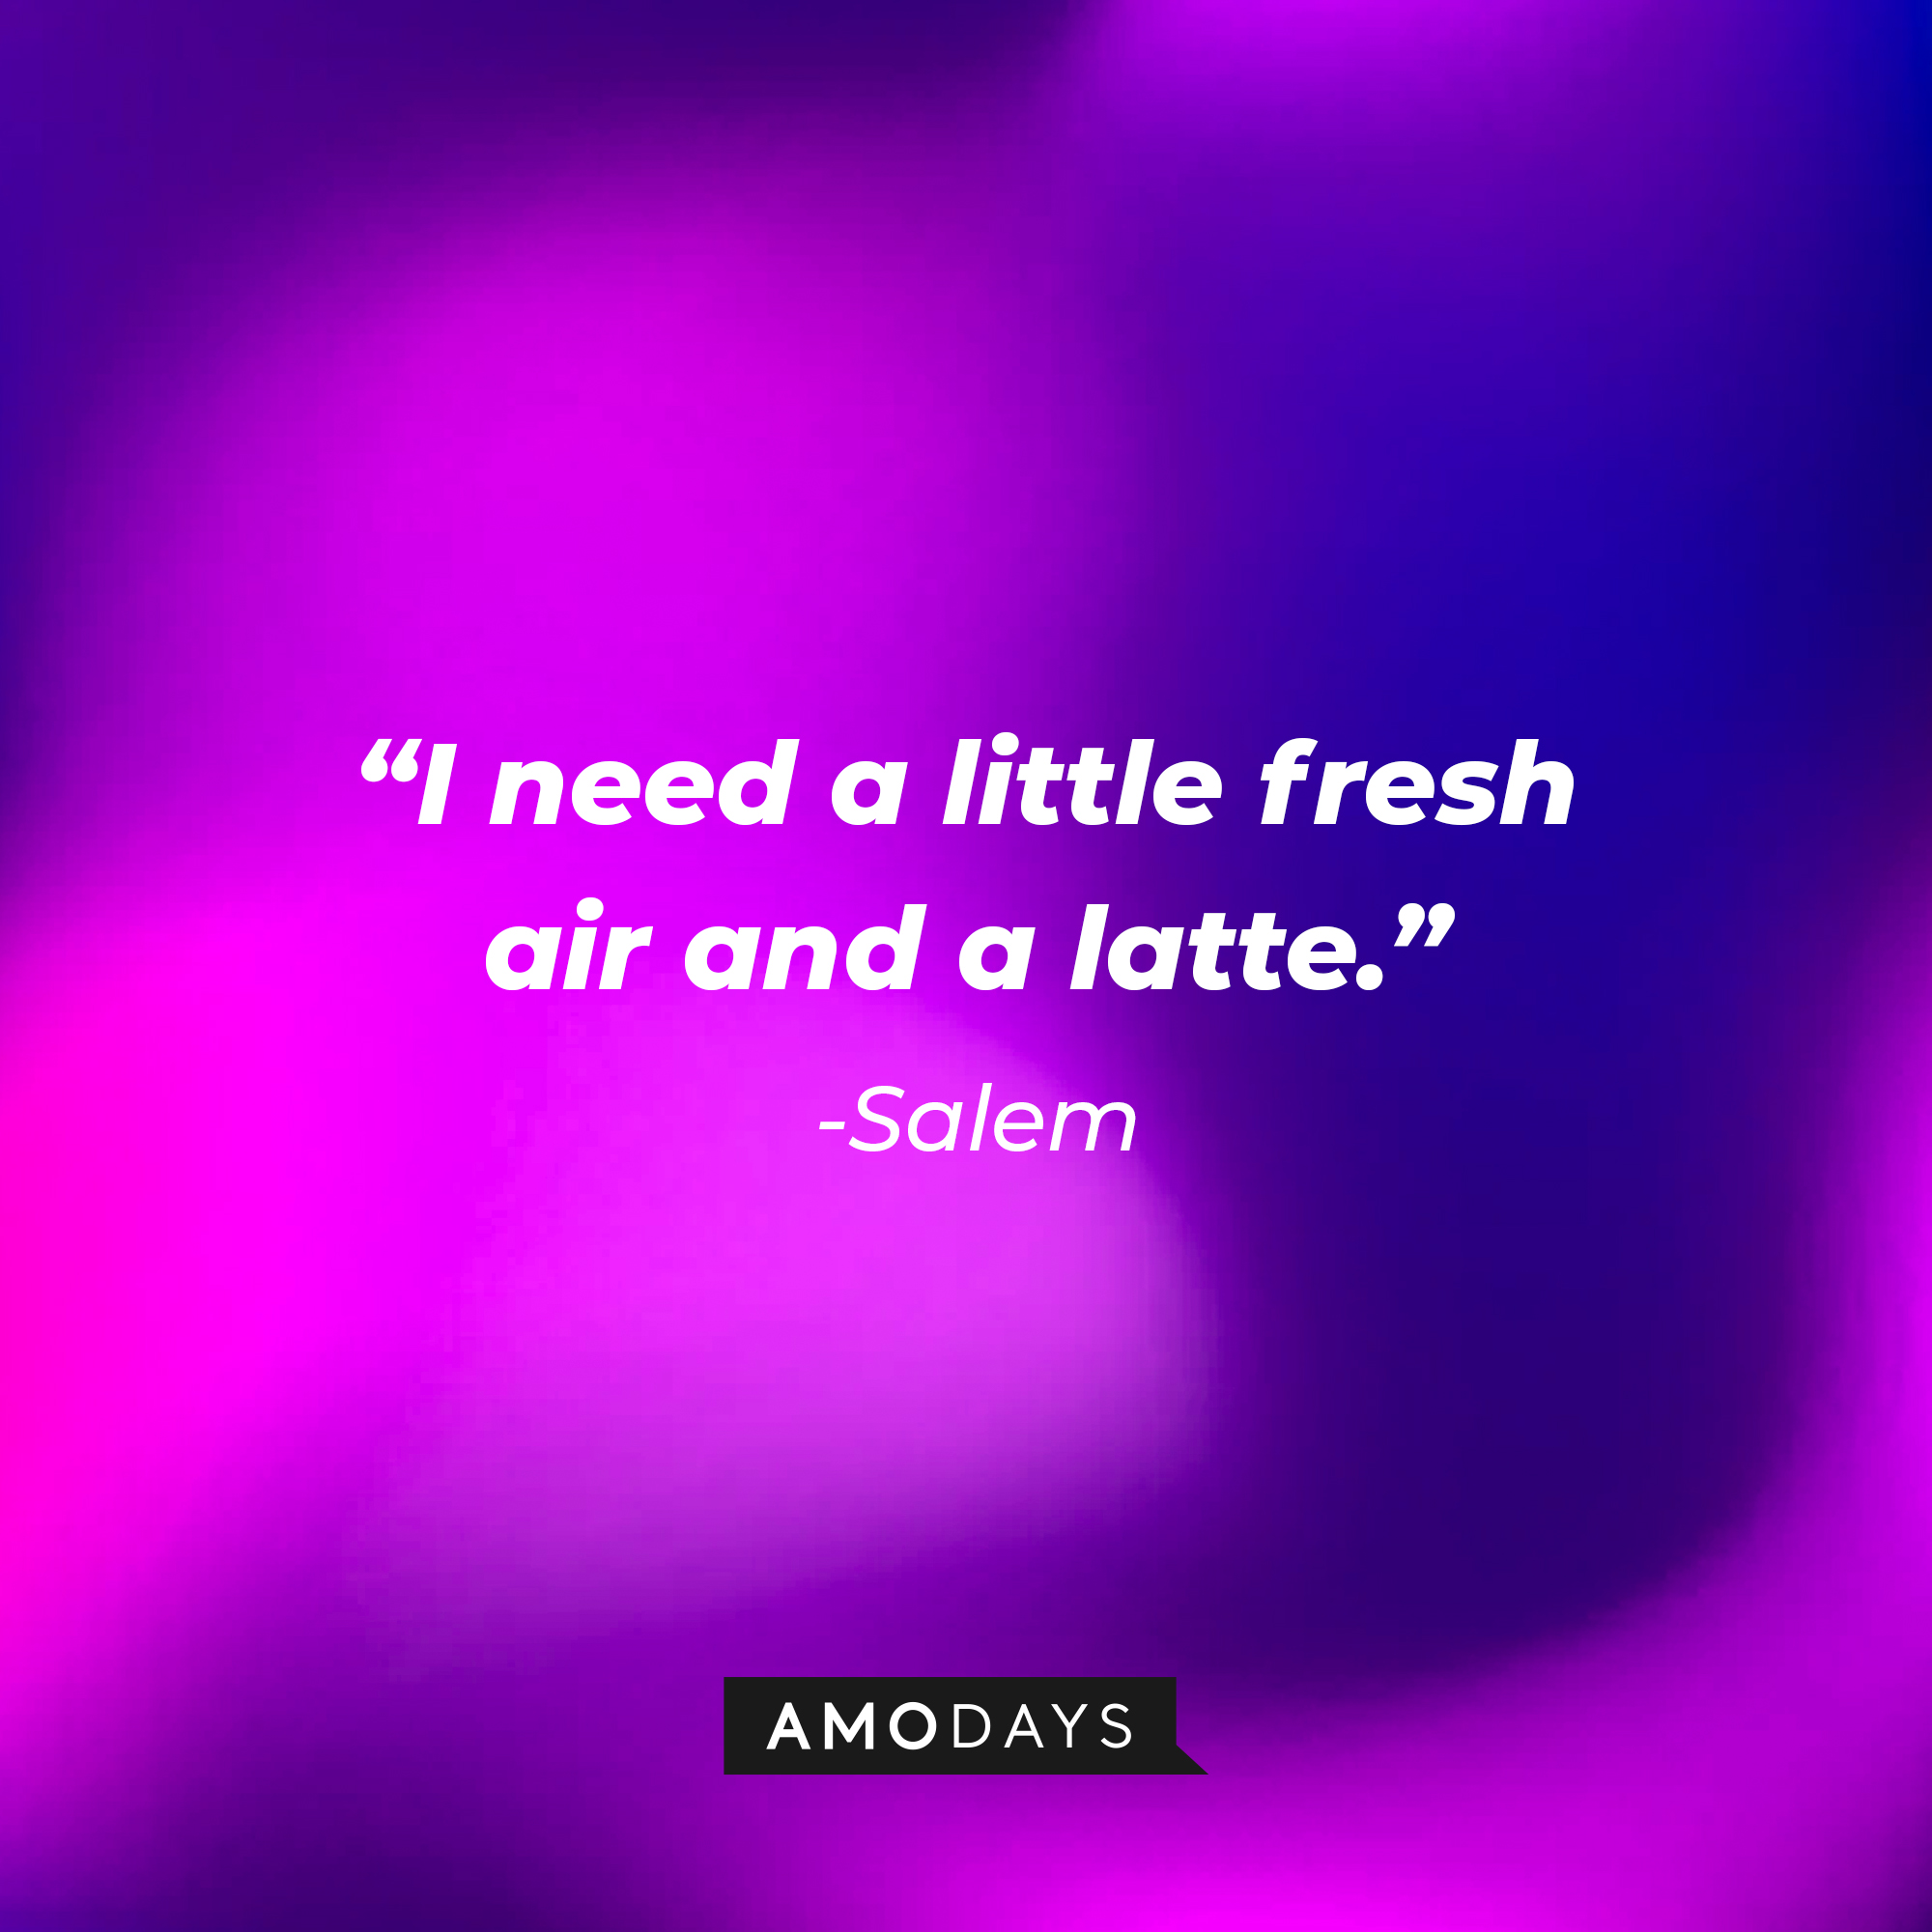 Salem’s quote: “I need a little fresh air and a latte.” | Source: AmoDays